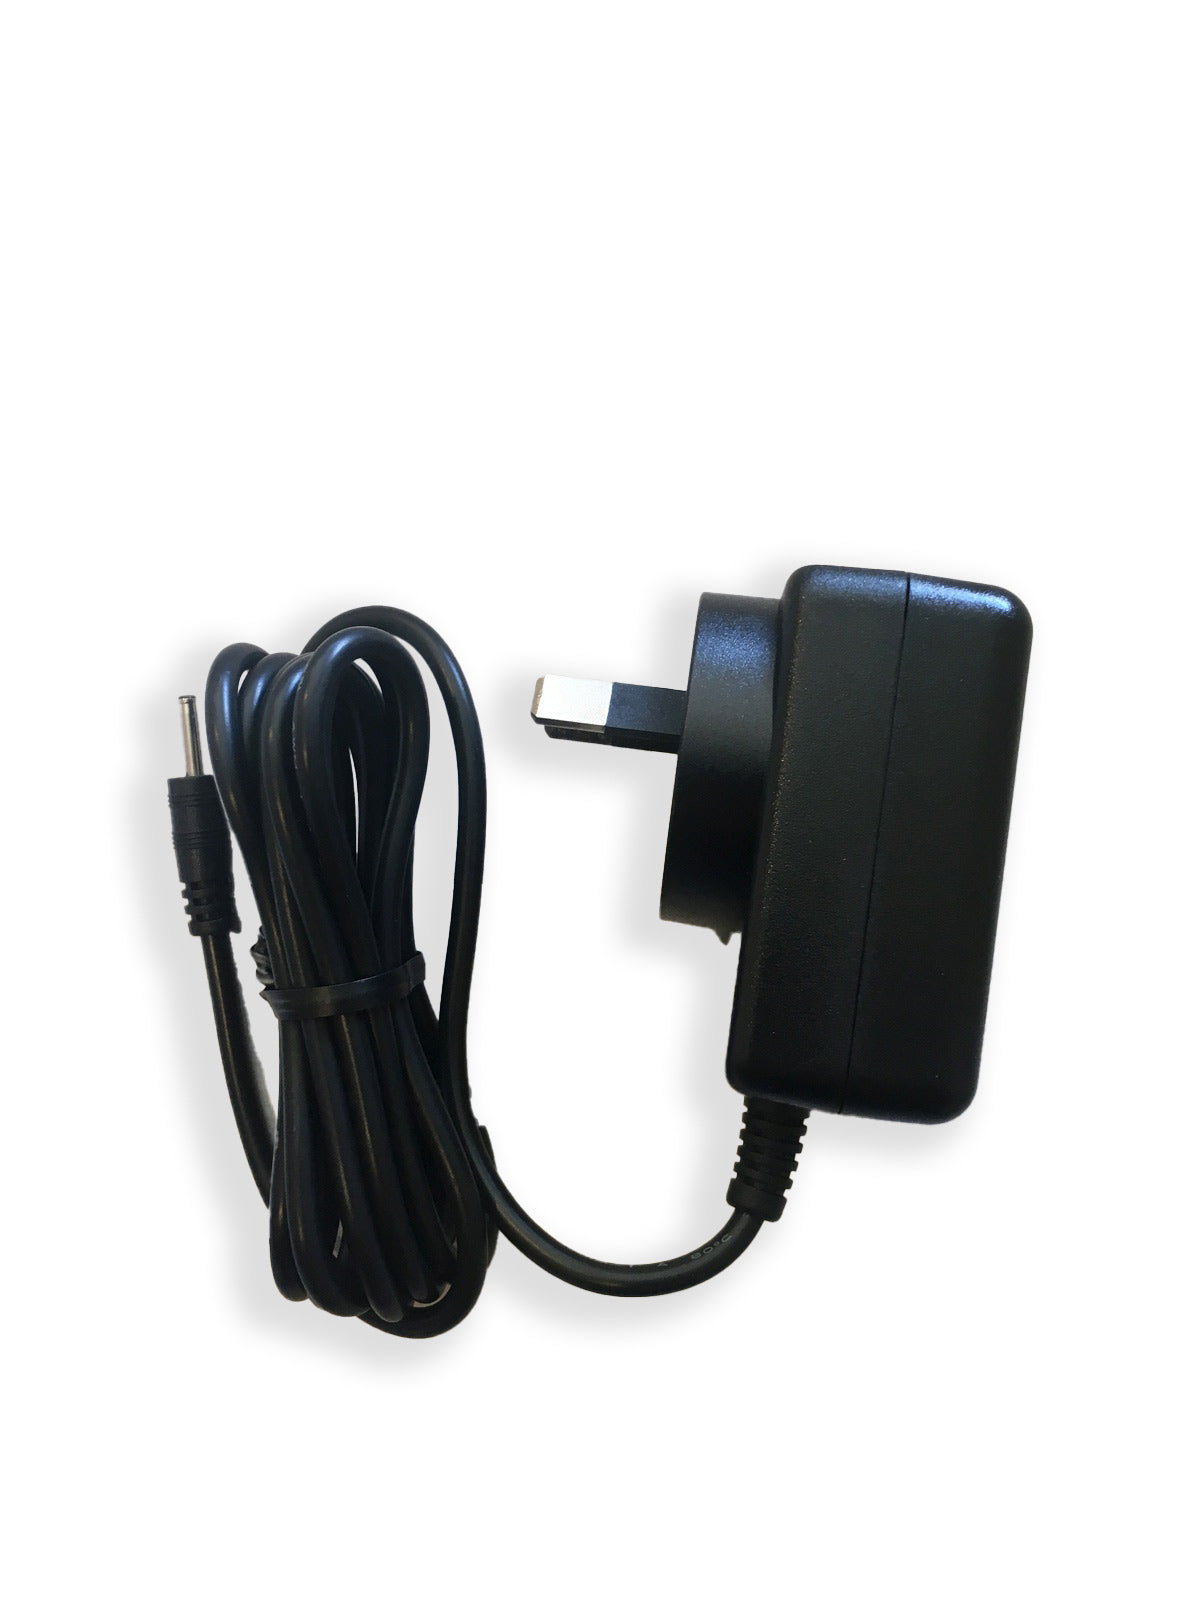 Handy Cure Laser Replacement Charger - Black - 5V 